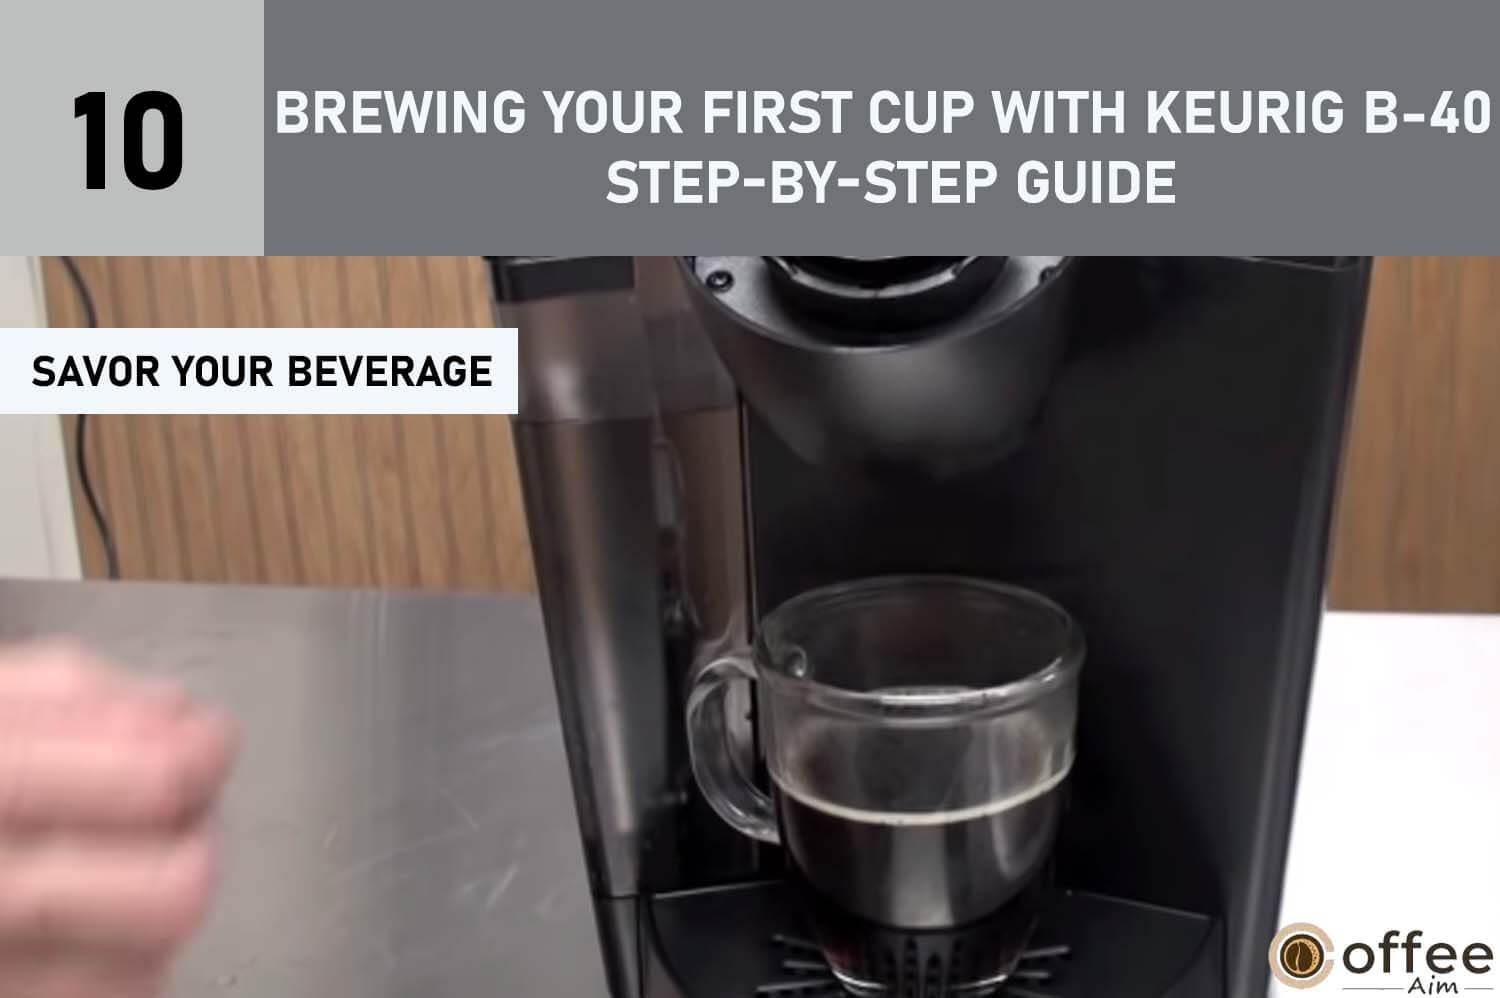 Capturing the Essence of Enjoyment: Embrace the Flavors of Your Beverage" - Unveiling the Journey of Brewing Your First Cup with the Keurig B-40: A Comprehensive Step-by-Step Guide - As Explored in the Article "Mastering the Art of Using the Keurig B-40"